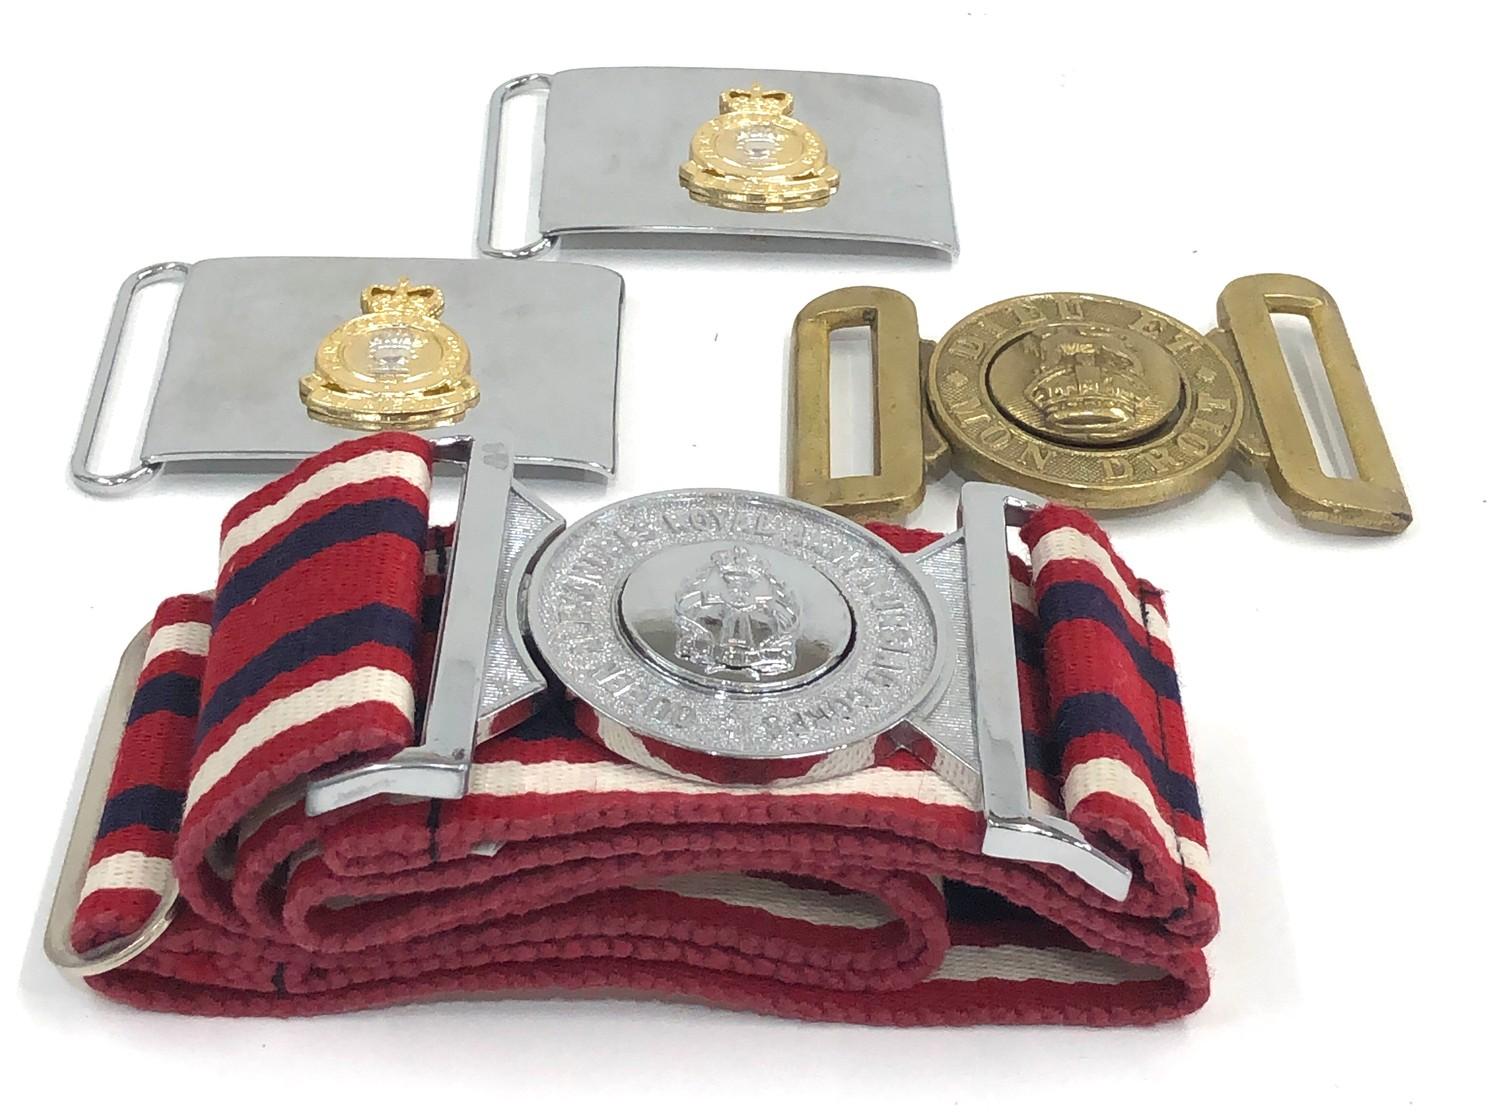 4 military army belts and buckles inc army nursing corp - Bild 2 aus 2